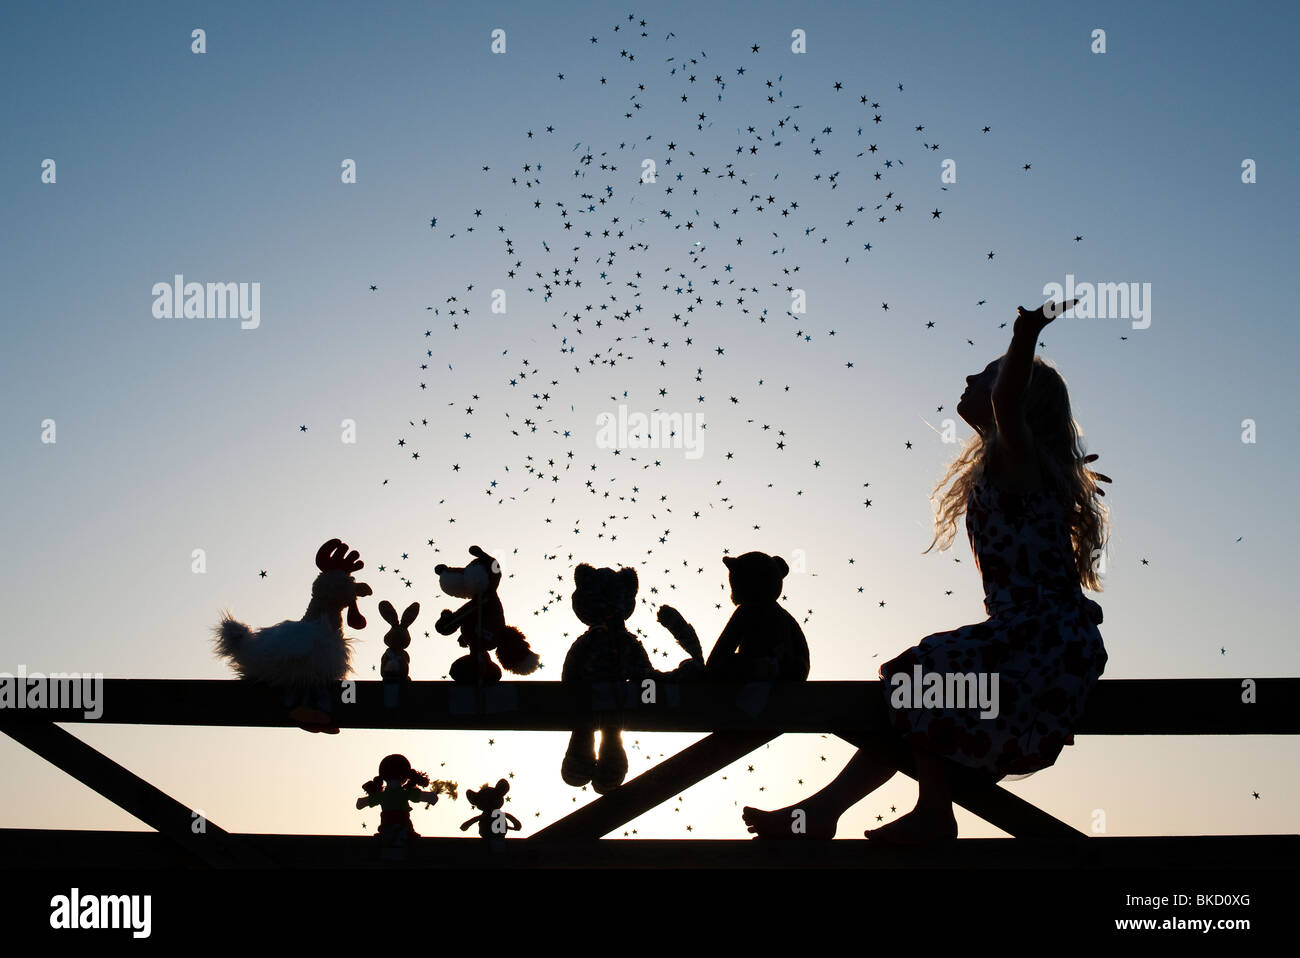 Girl throwing stars over a Rag doll, chicken, fox, rabbit and teddy bear soft toys sitting on a gate at sunset. Silhouette Stock Photo